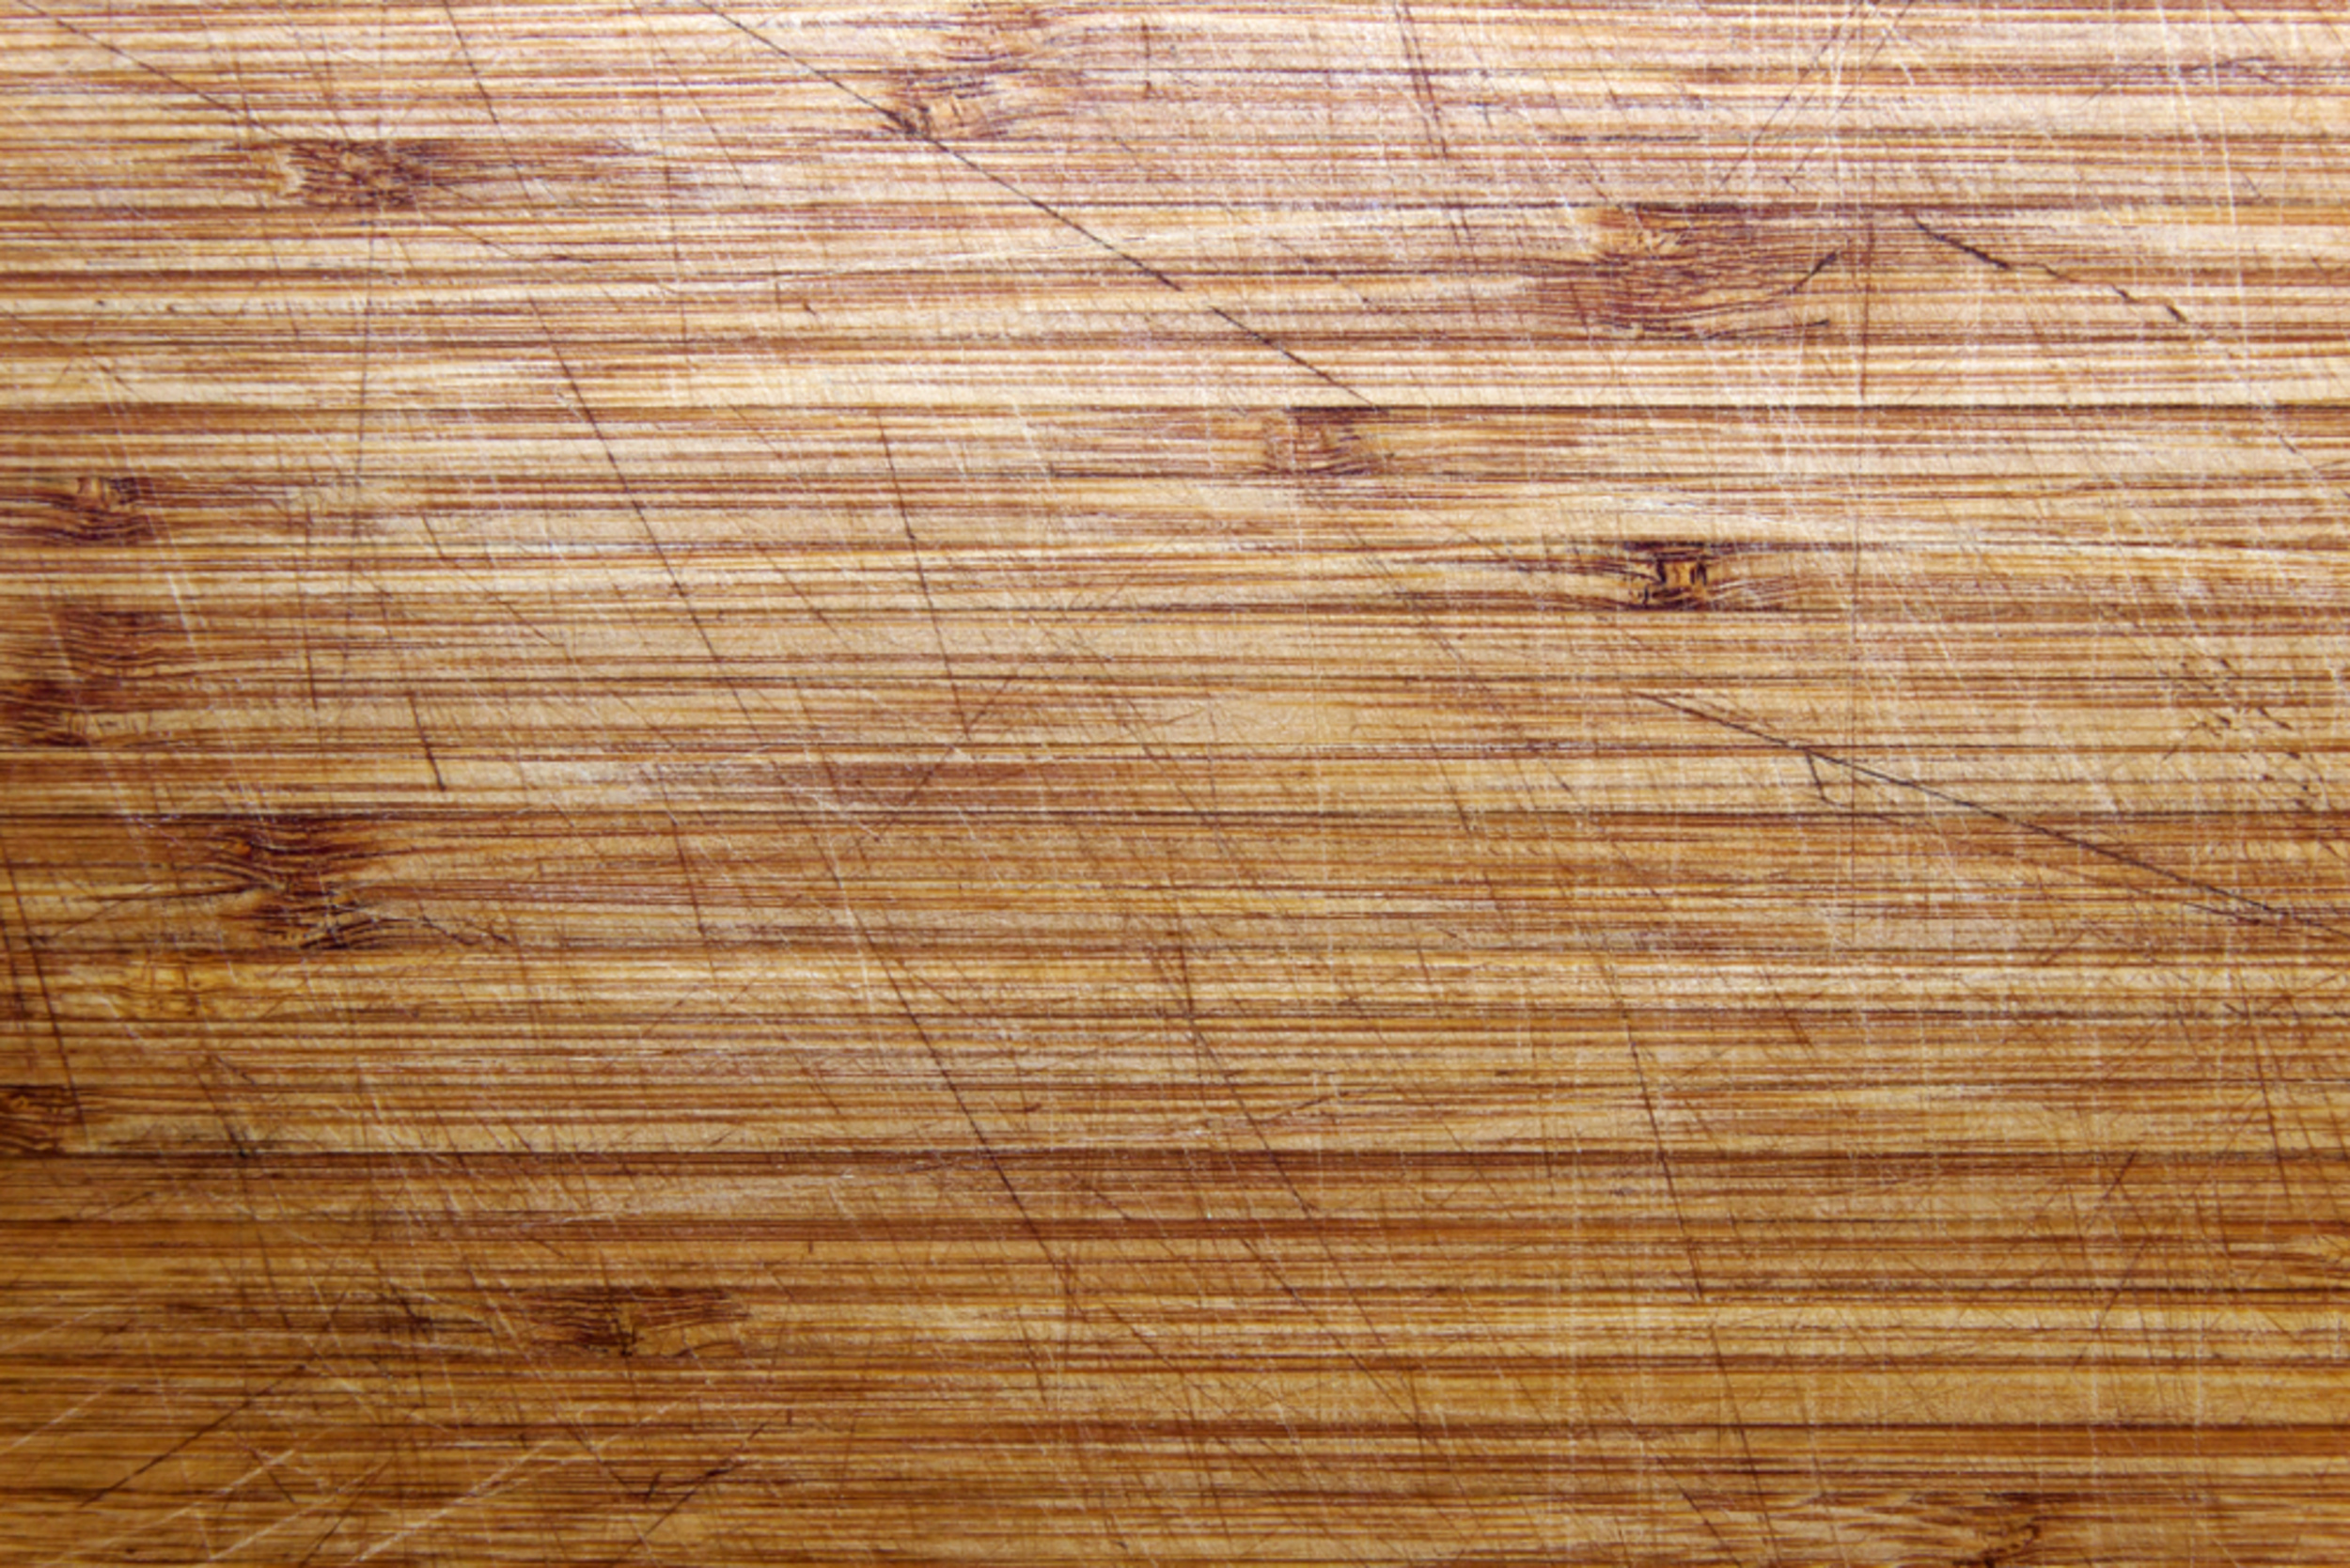 <p>It might seem strange, but a walnut can work wonders on scratches in your hardwood flooring. Vigorously rub the flesh of the nut into the scratch until you can no longer see it, then wipe away any excess with a microfiber cloth. </p><p><a href='https://www.msn.com/en-us/community/channel/vid-cj9pqbr0vn9in2b6ddcd8sfgpfq6x6utp44fssrv6mc2gtybw0us'>Follow us on MSN to see more of our exclusive lifestyle content.</a></p>